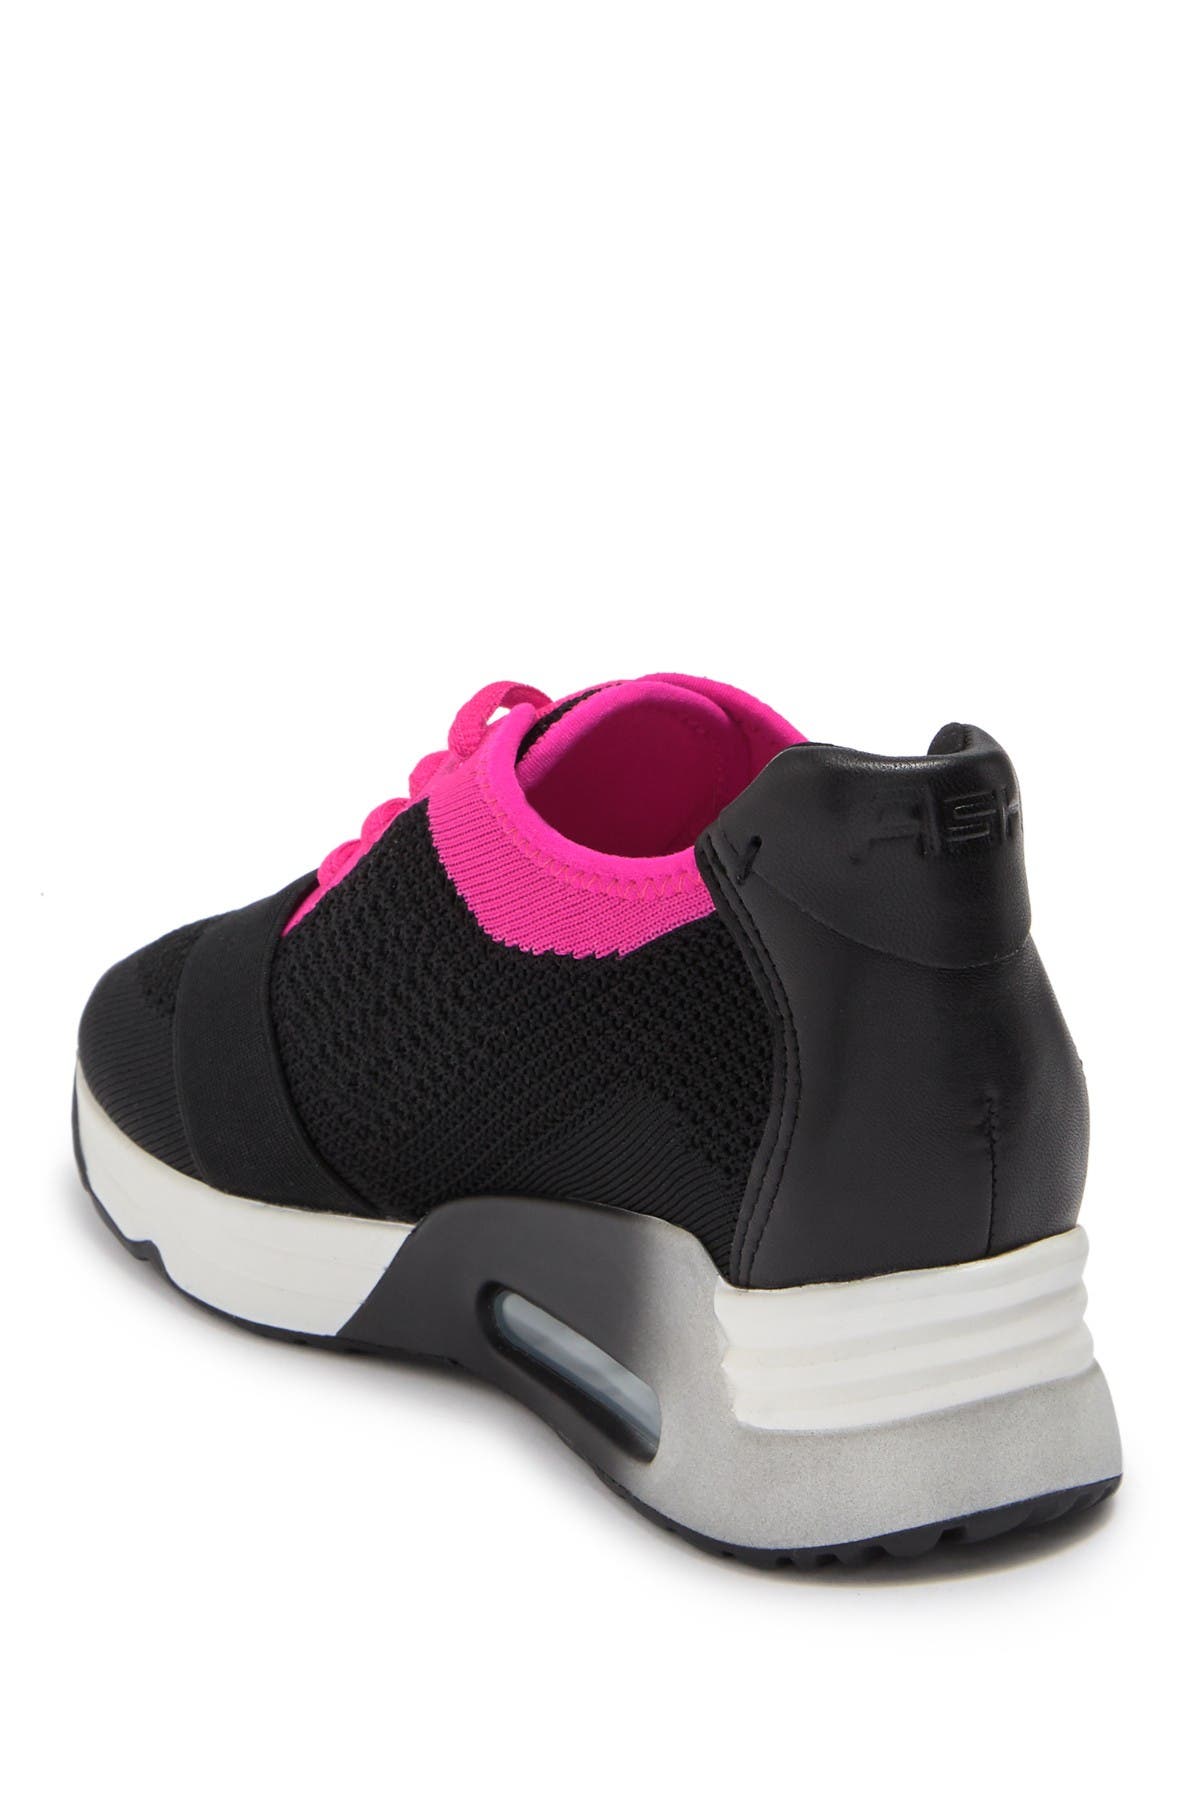 ash lacey wedge sneaker